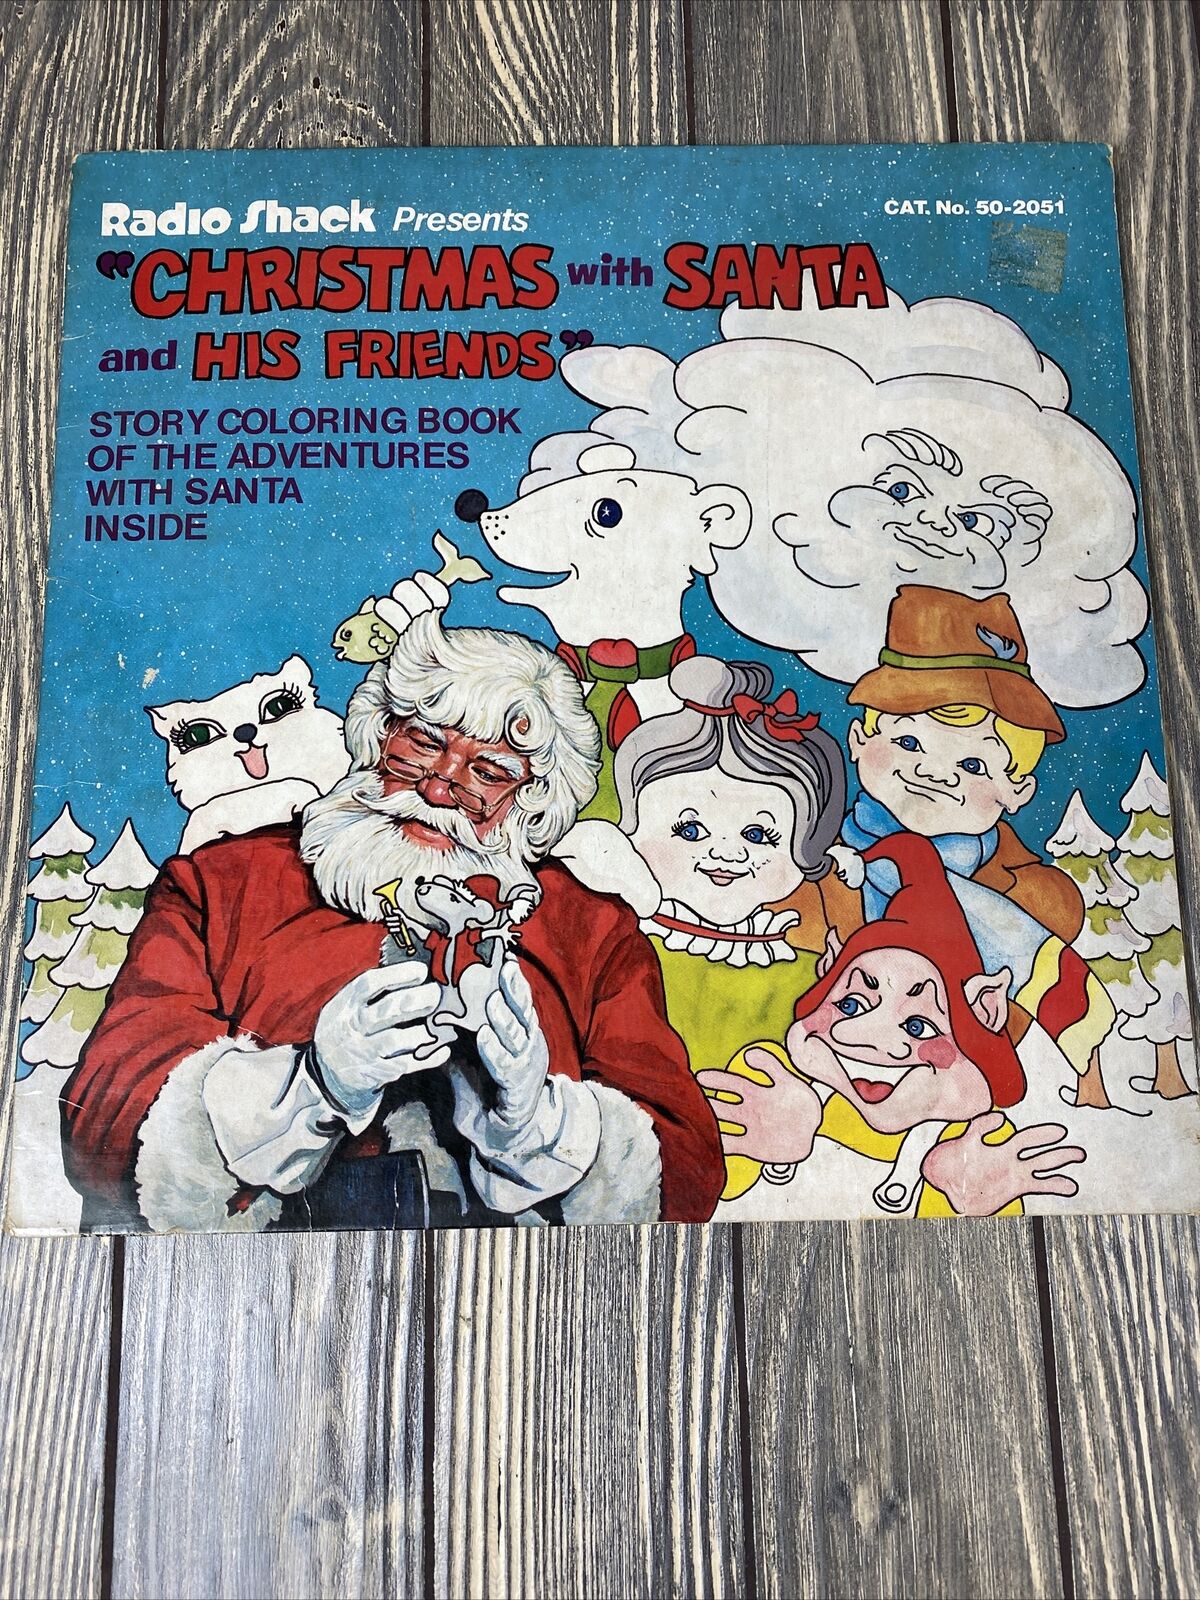 Christmas With Santa And His Friends Record 50-2052  1979 Vintage